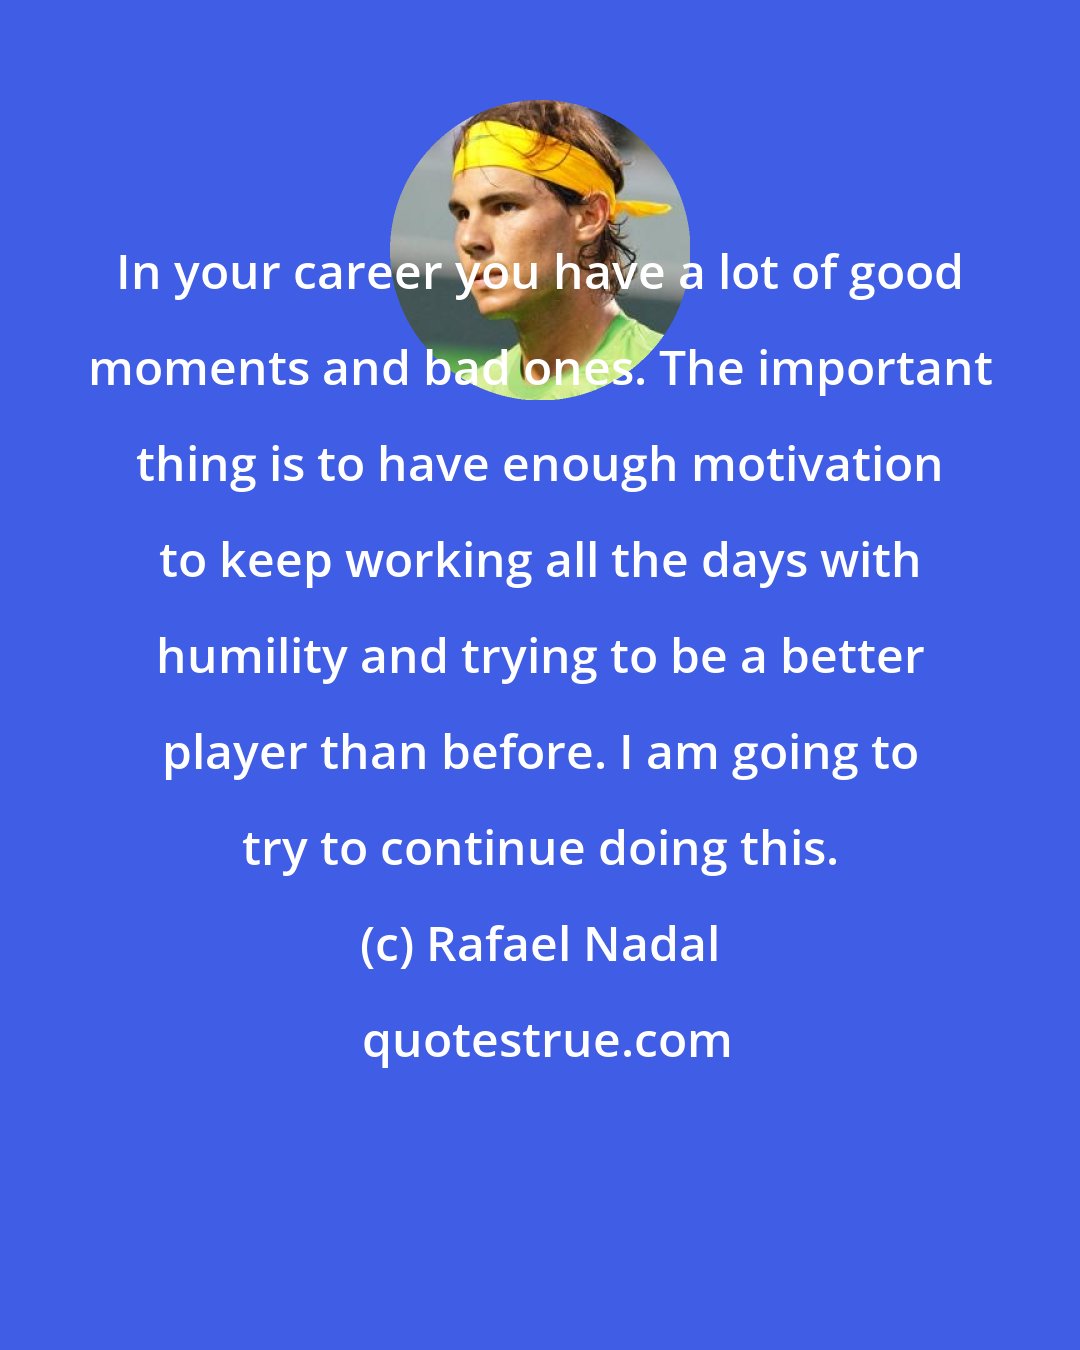 Rafael Nadal: In your career you have a lot of good moments and bad ones. The important thing is to have enough motivation to keep working all the days with humility and trying to be a better player than before. I am going to try to continue doing this.